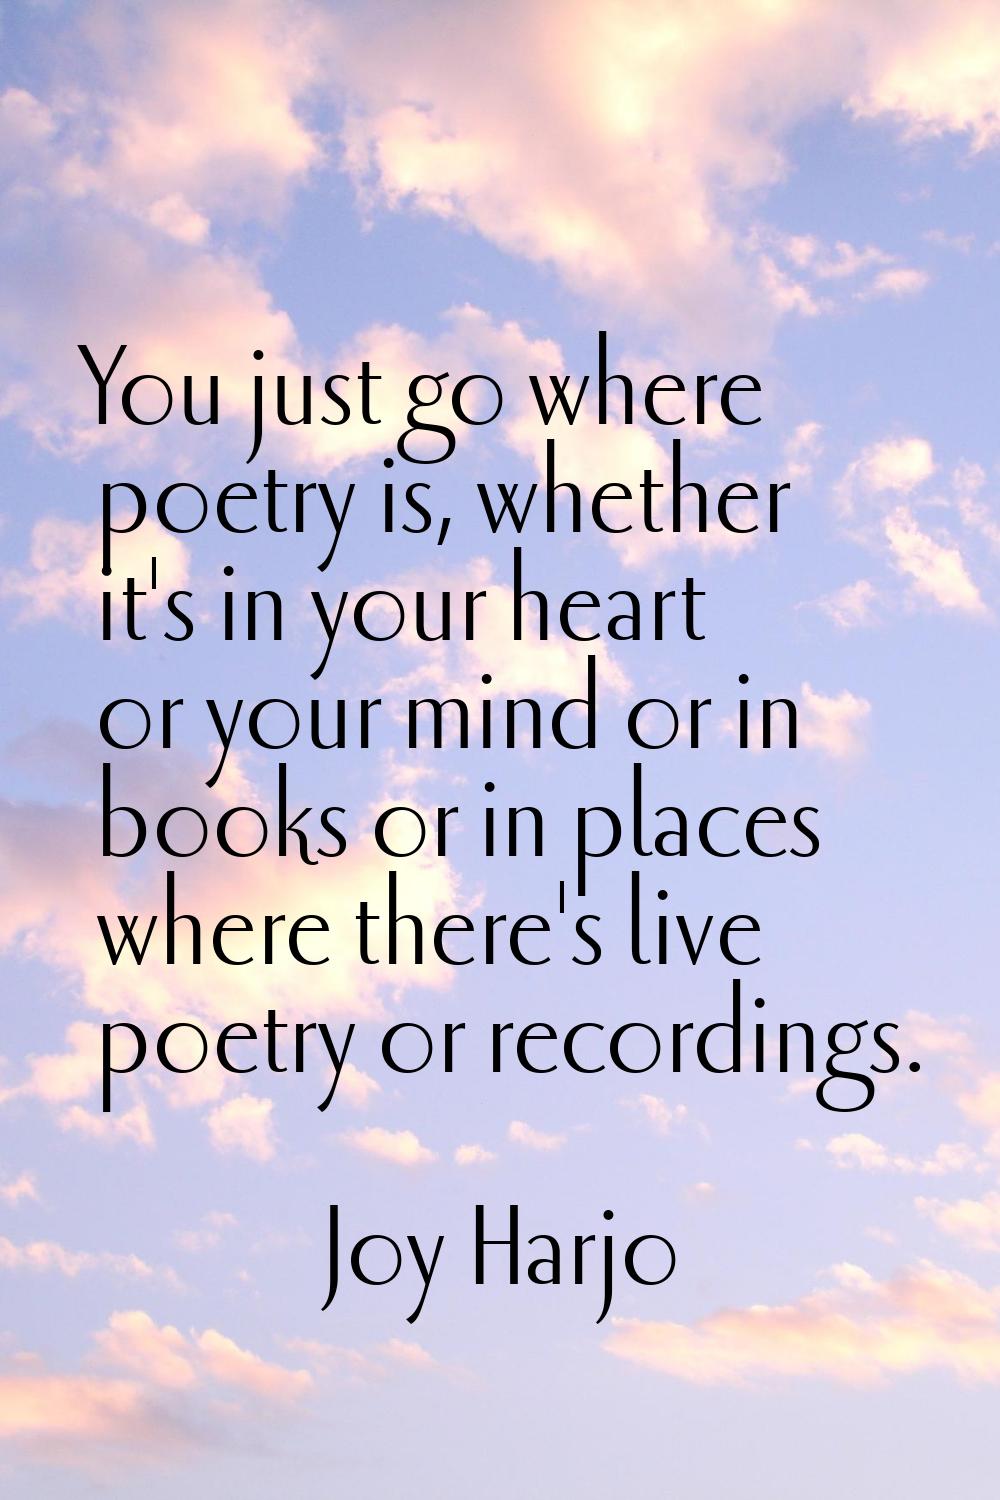 You just go where poetry is, whether it's in your heart or your mind or in books or in places where